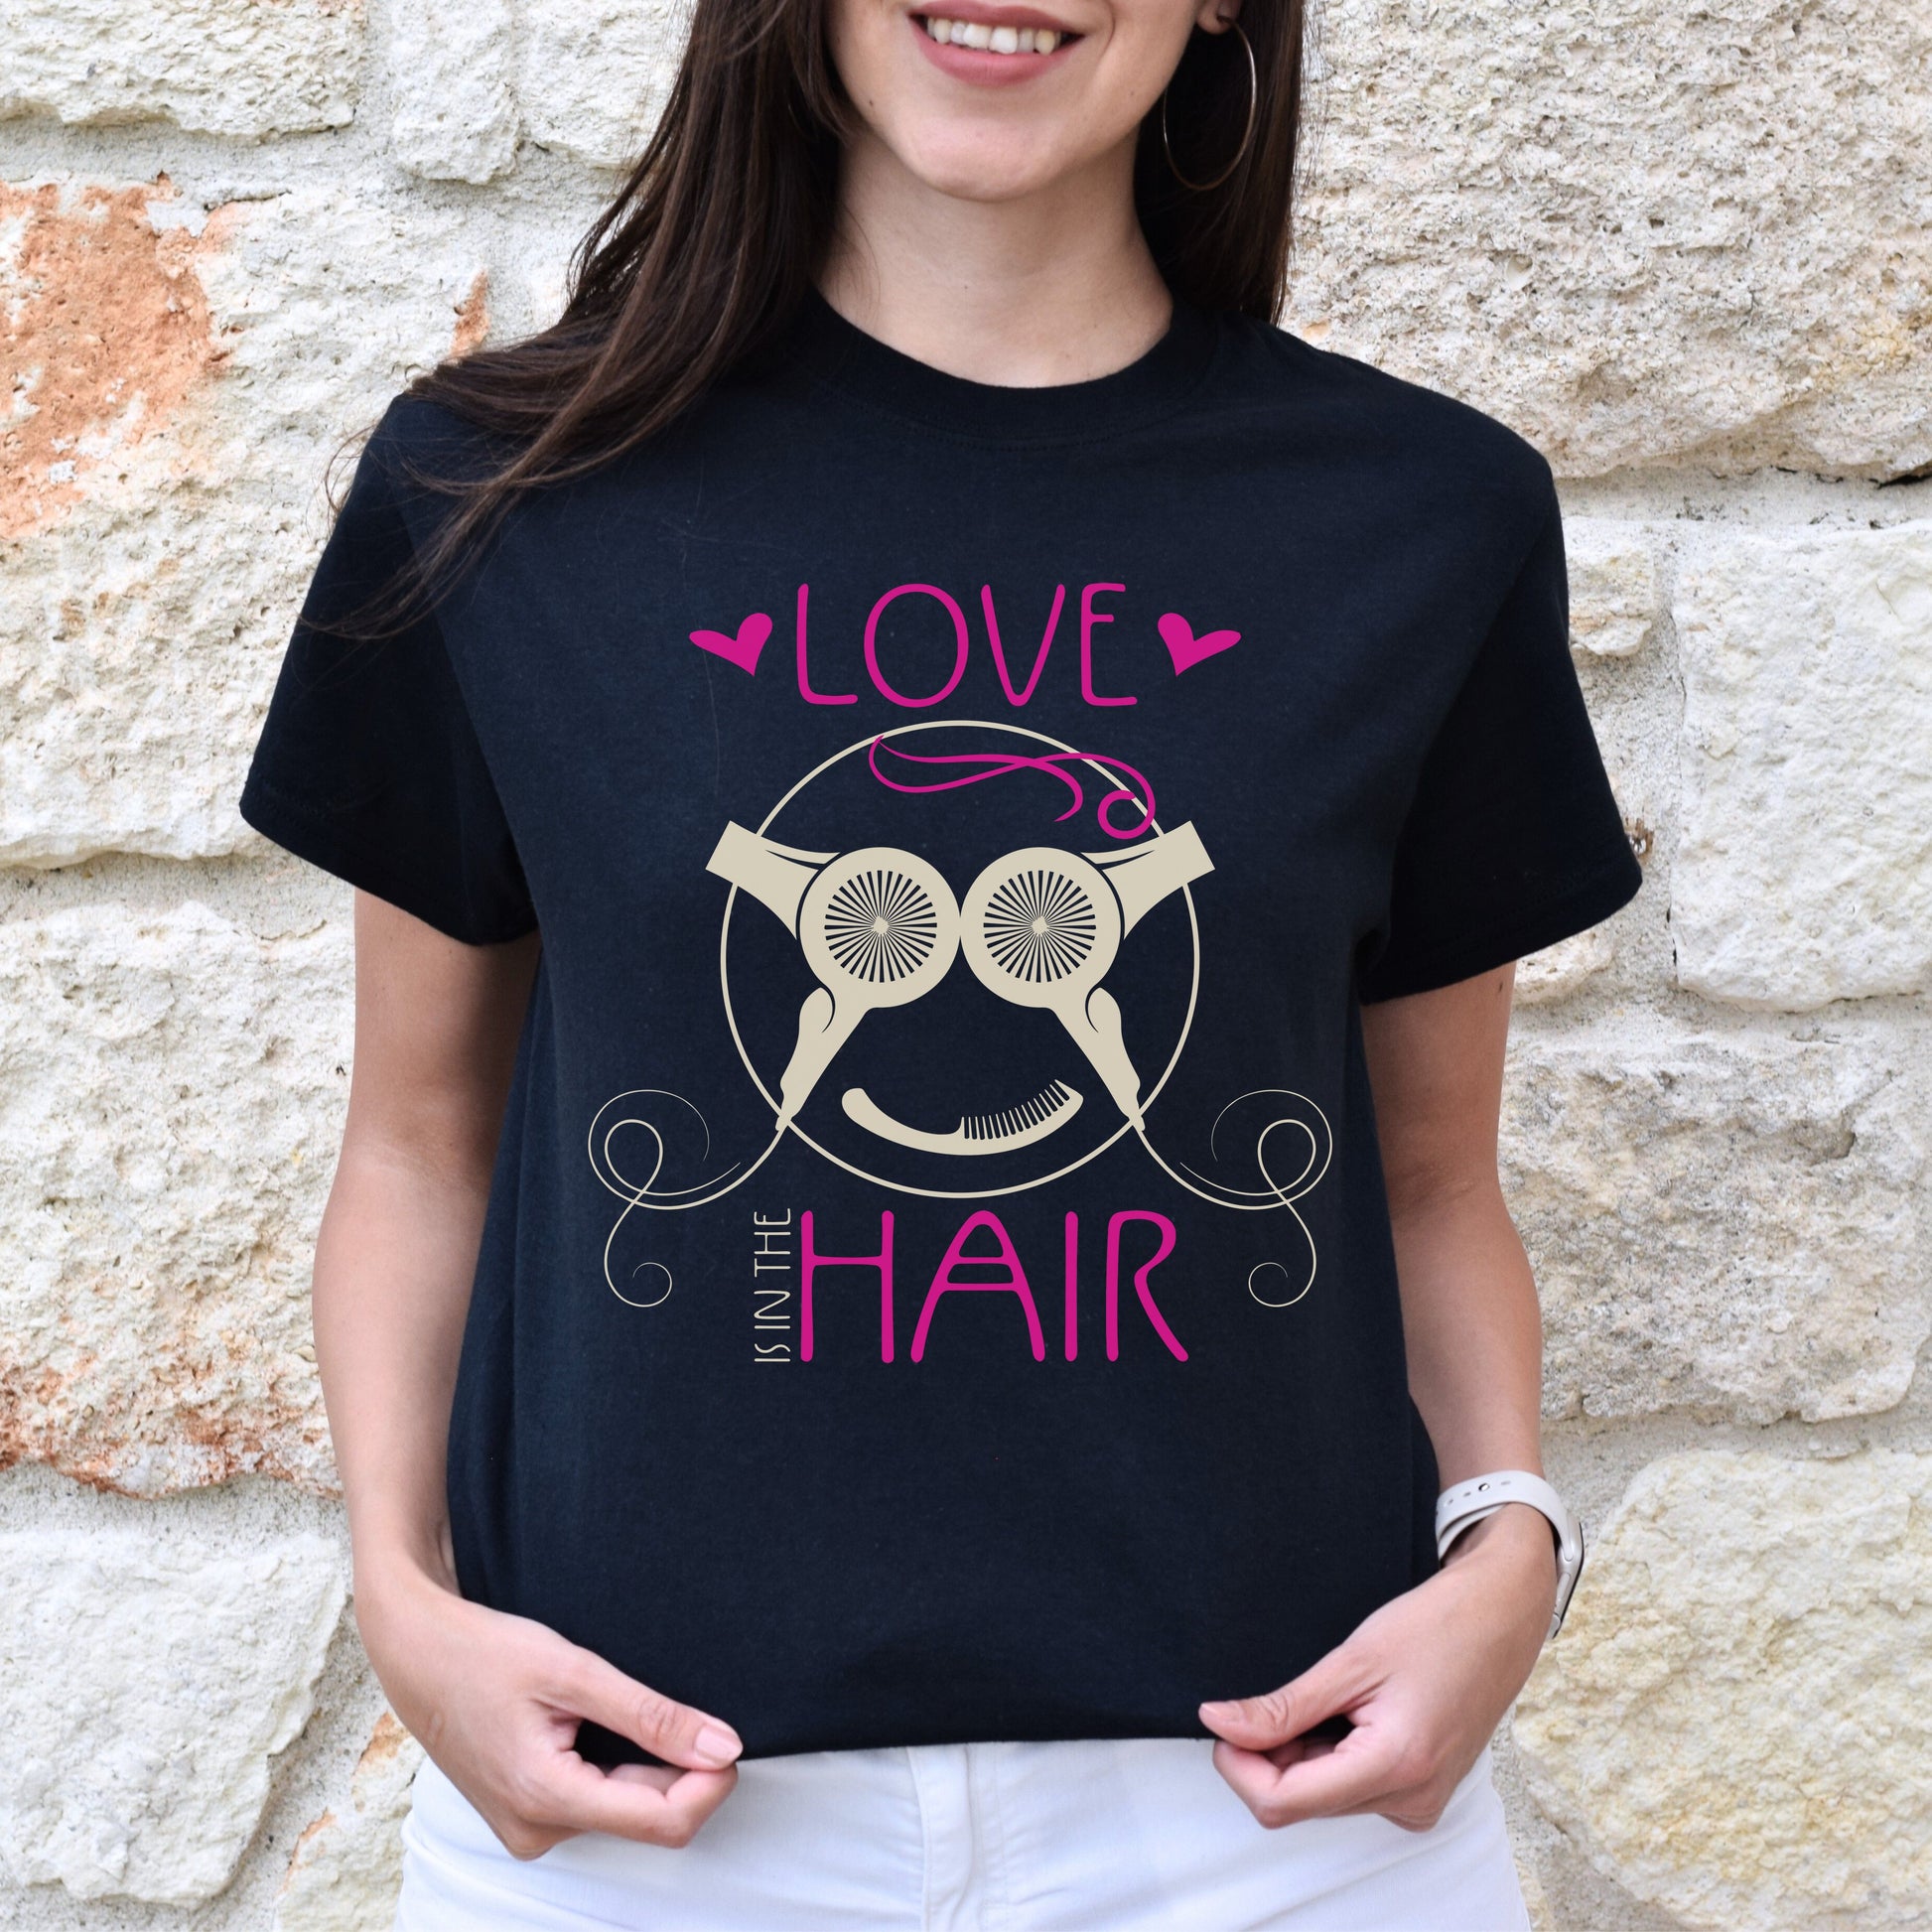 Love is in the hair Unisex T-shirt hairdresser haircutter tee black dark heather-Family-Gift-Planet